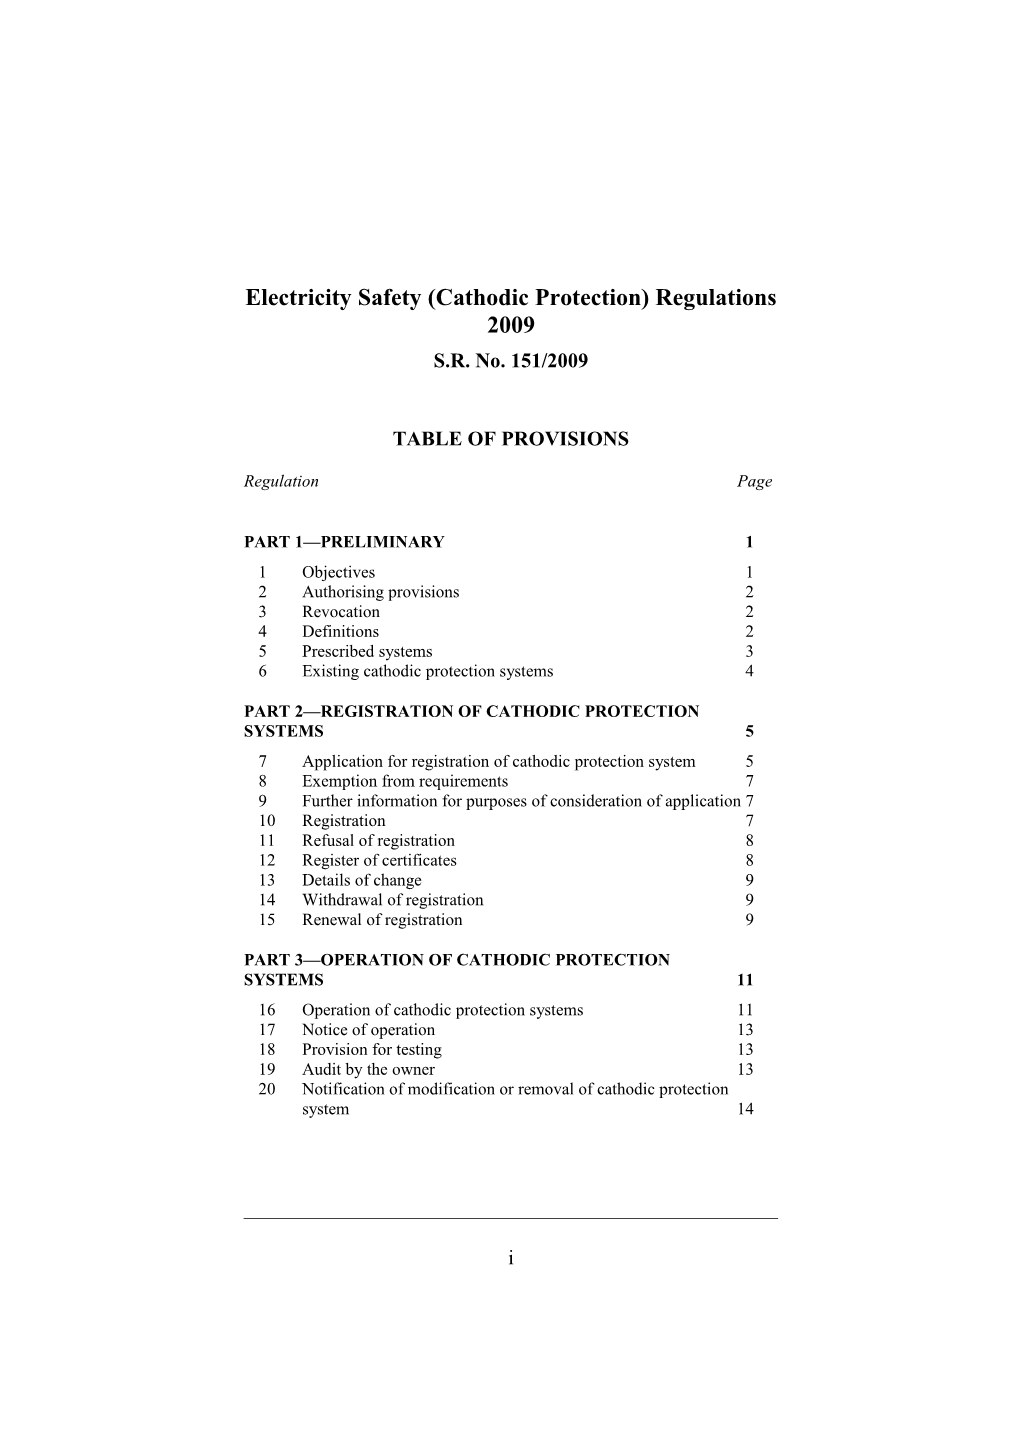 Electricity Safety (Cathodic Protection) Regulations 2009